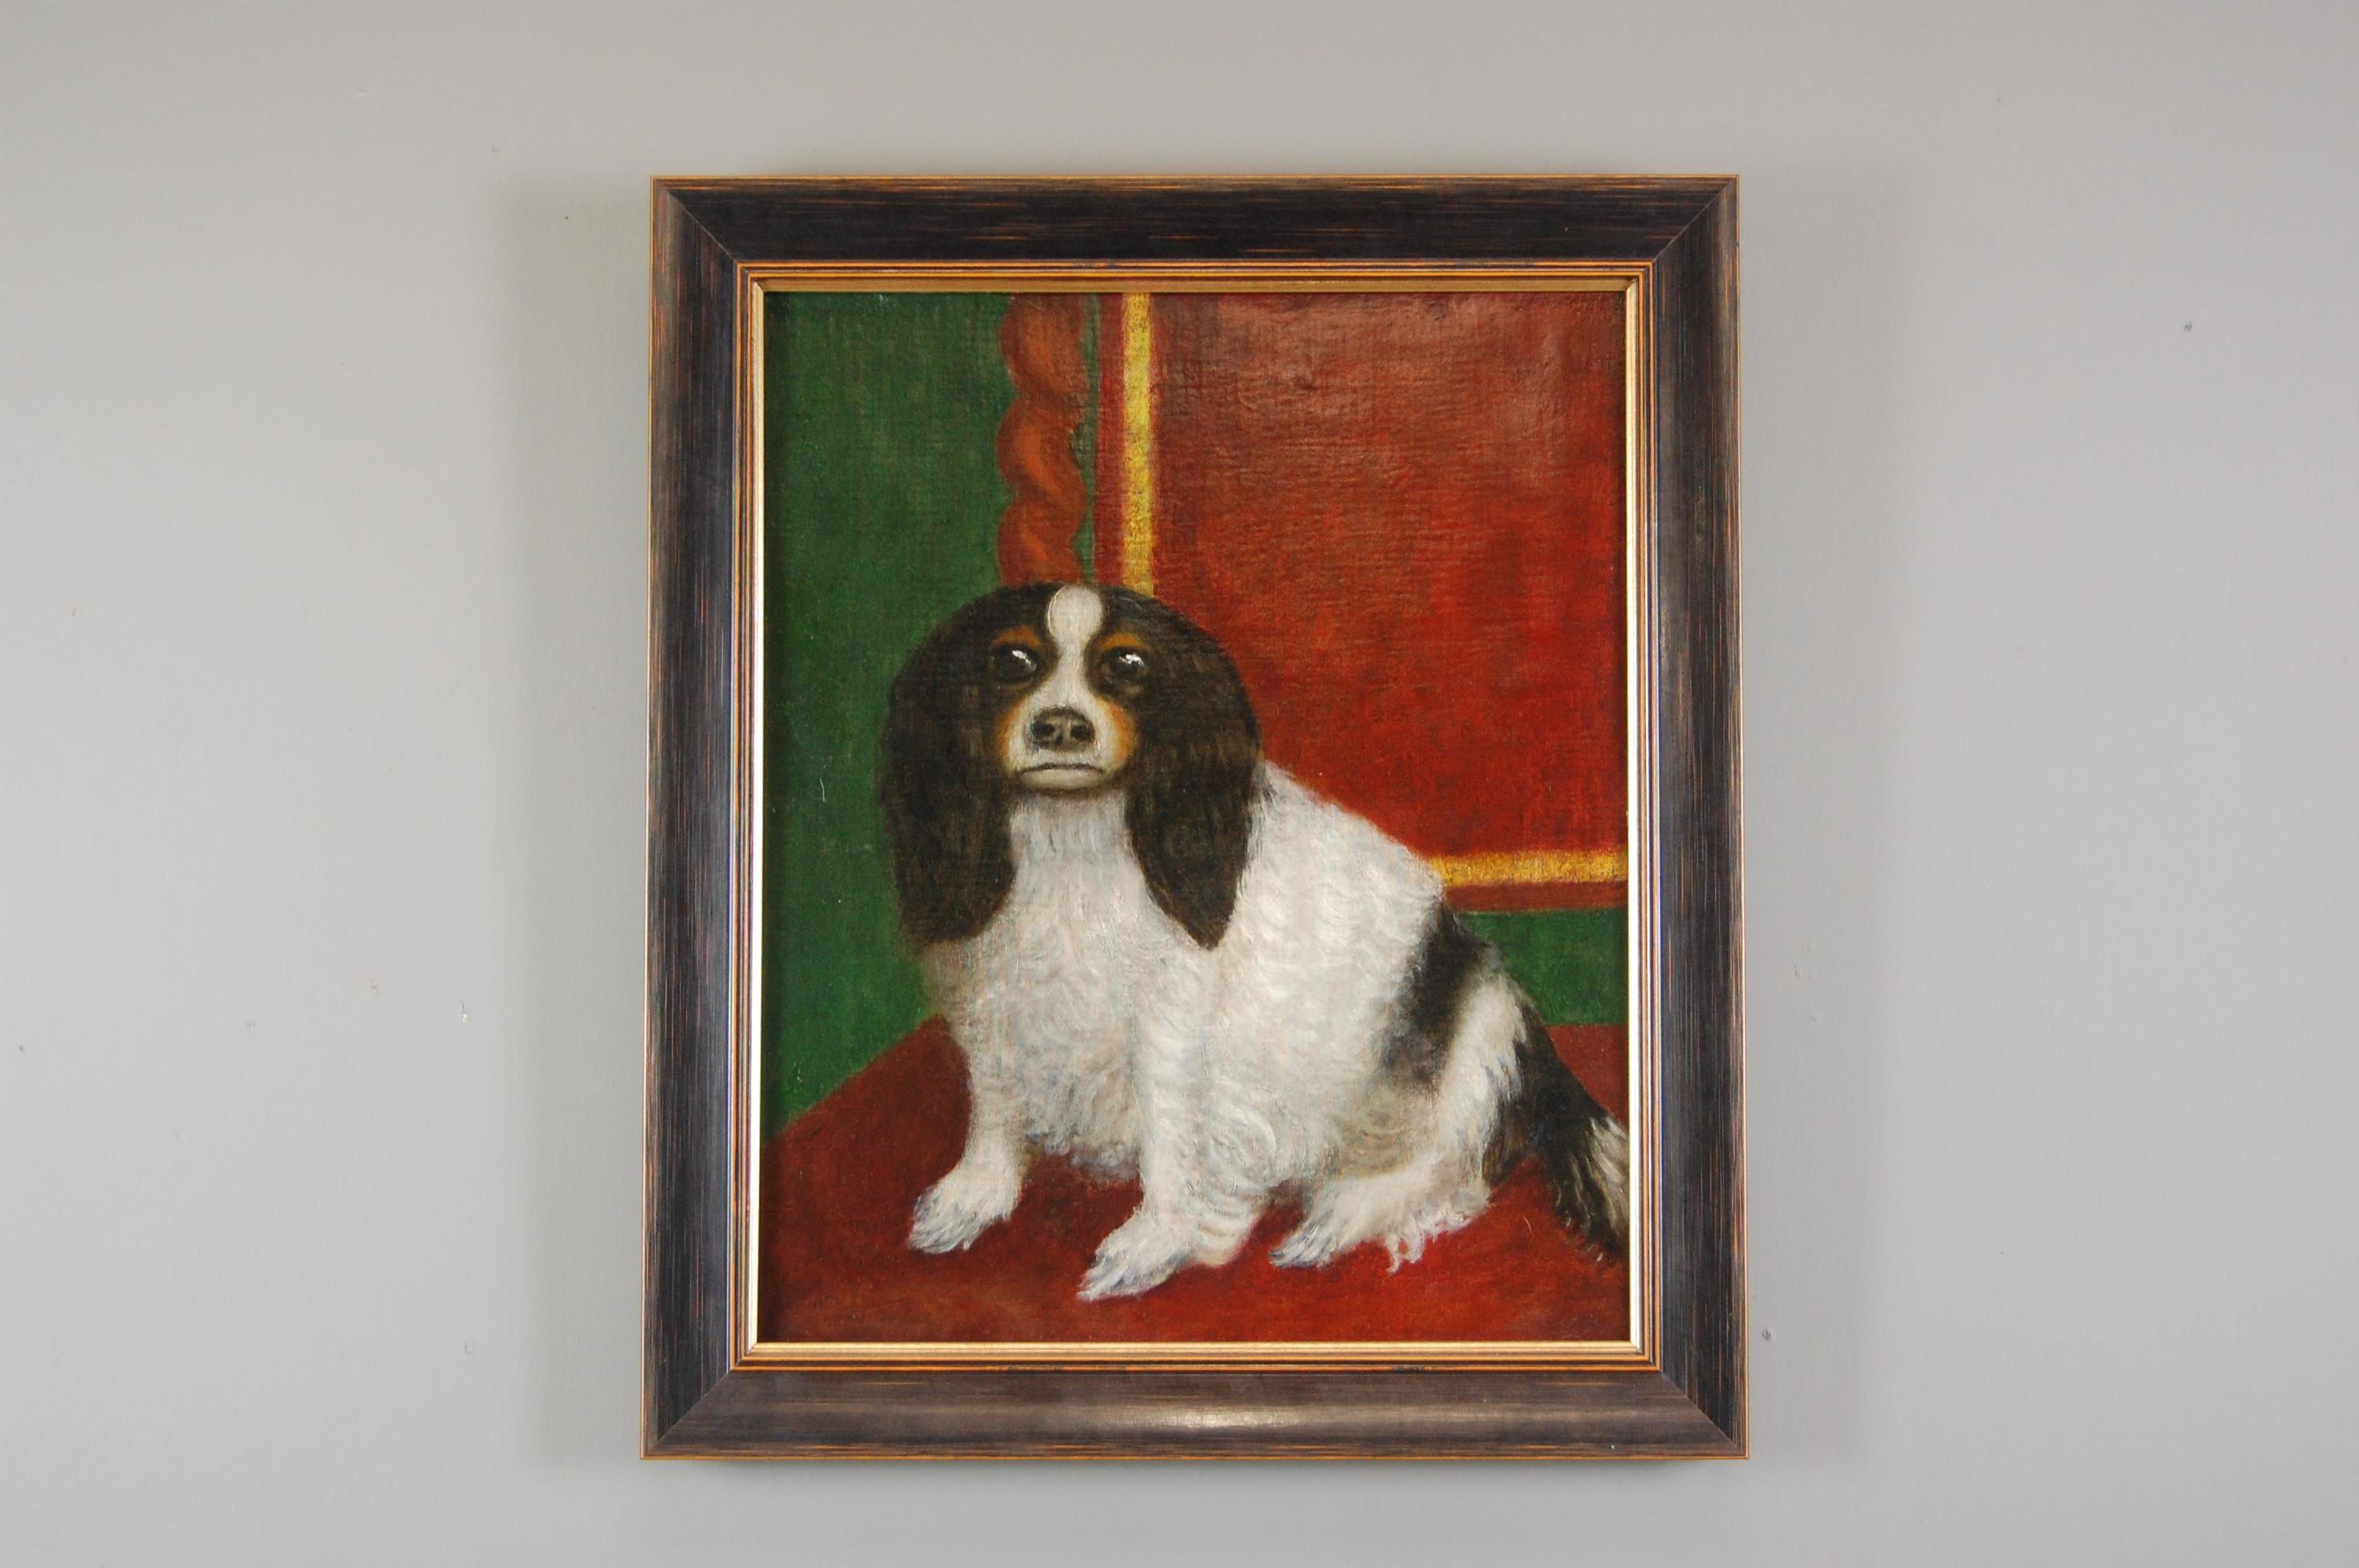 A charming large naive portrait of a King Charles Spaniel. Seated on a red plush velvet barley twist chair. Against typical late 19th century dark green walls. Framed and Cleaned
19th century oil on canvas.